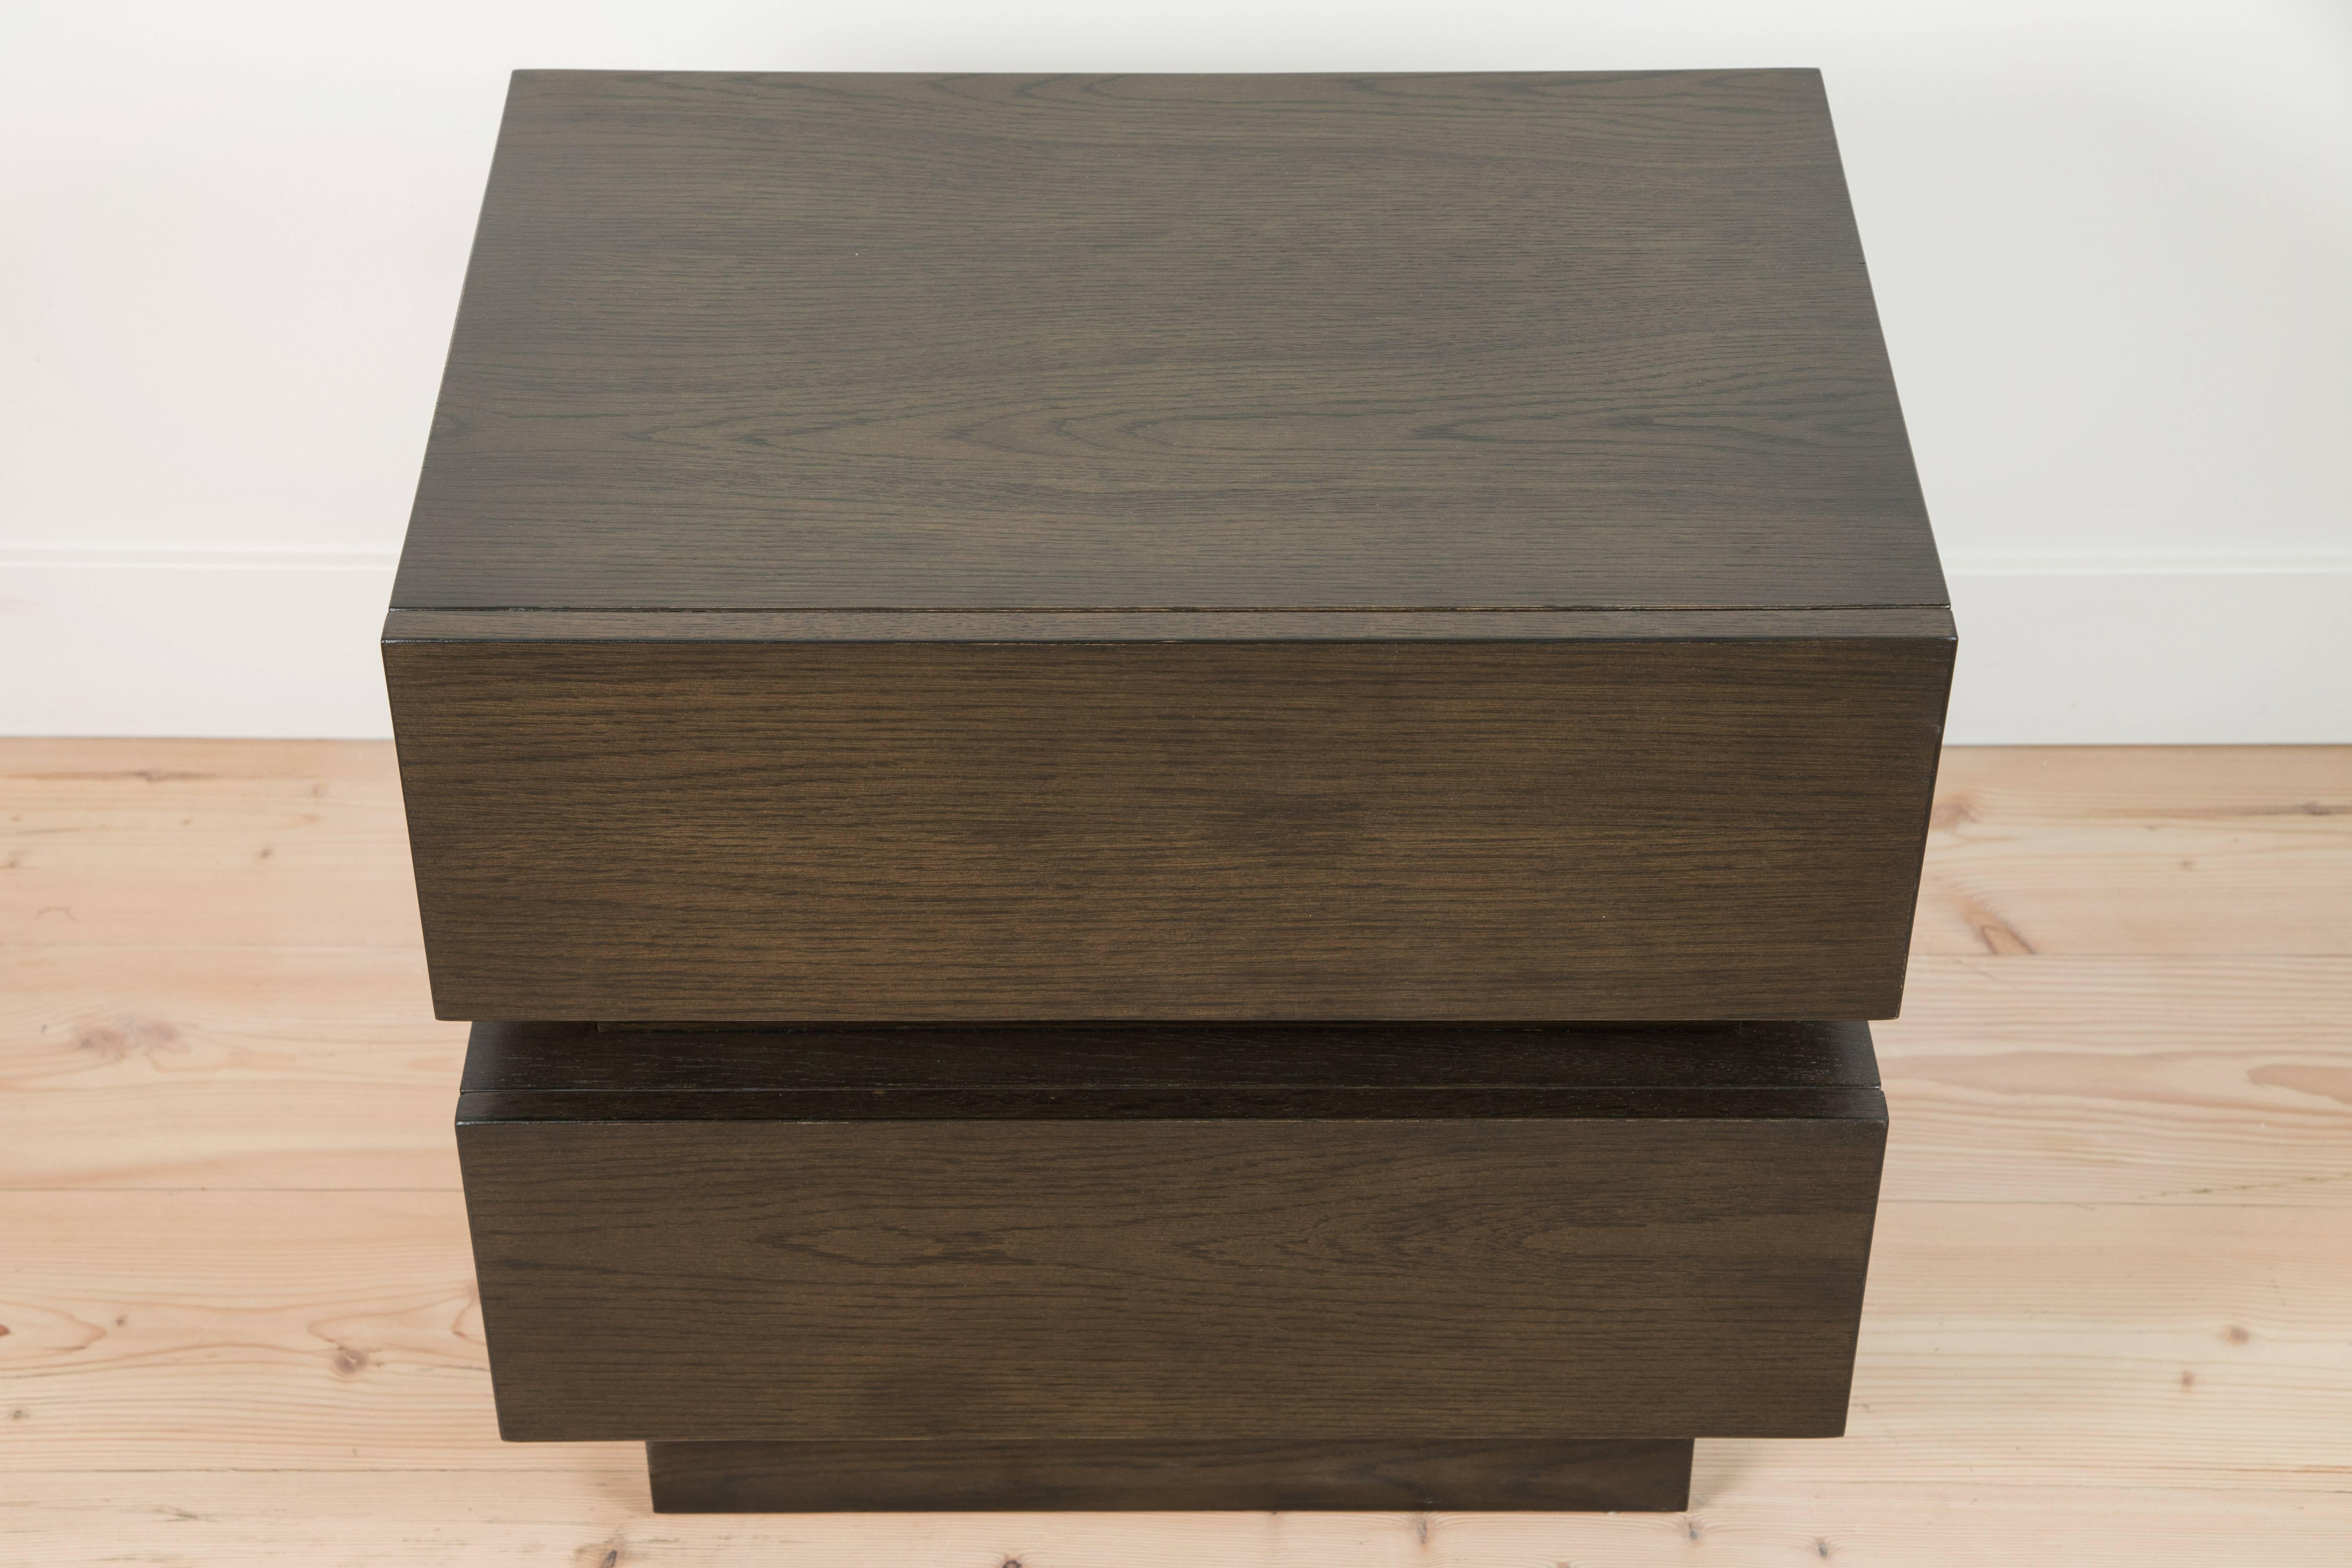 Pair of Small Stacked Box Nightstands by Lawson-Fenning 1